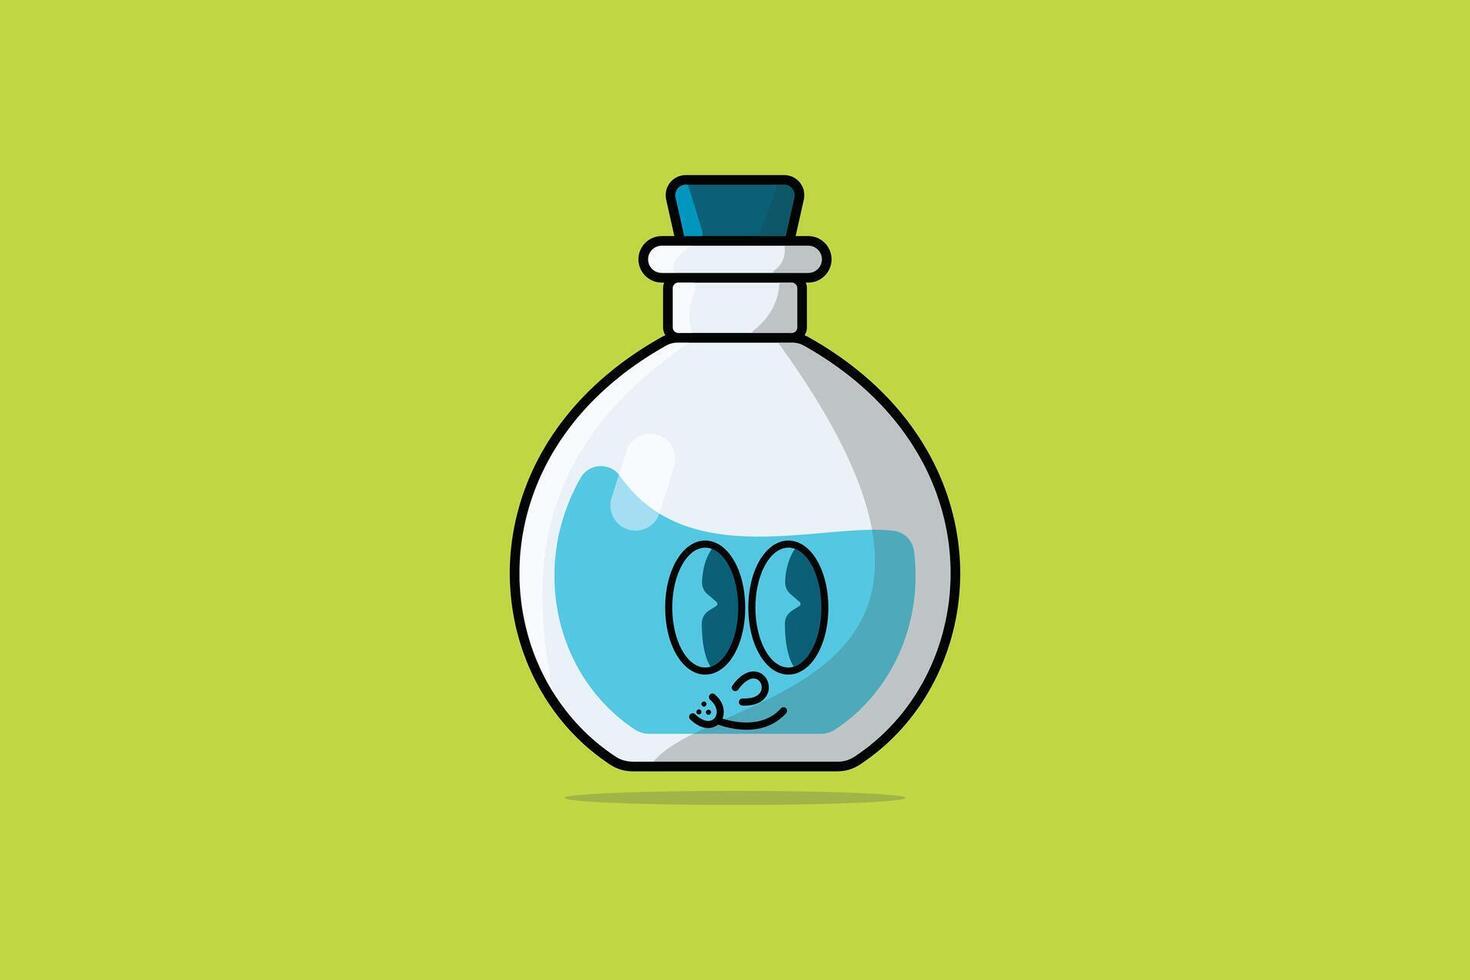 Potion Bottle with Cartoon Face vector illustration. Science object icon concept. Cartoon face with Potion vector design. Halloween drink design.